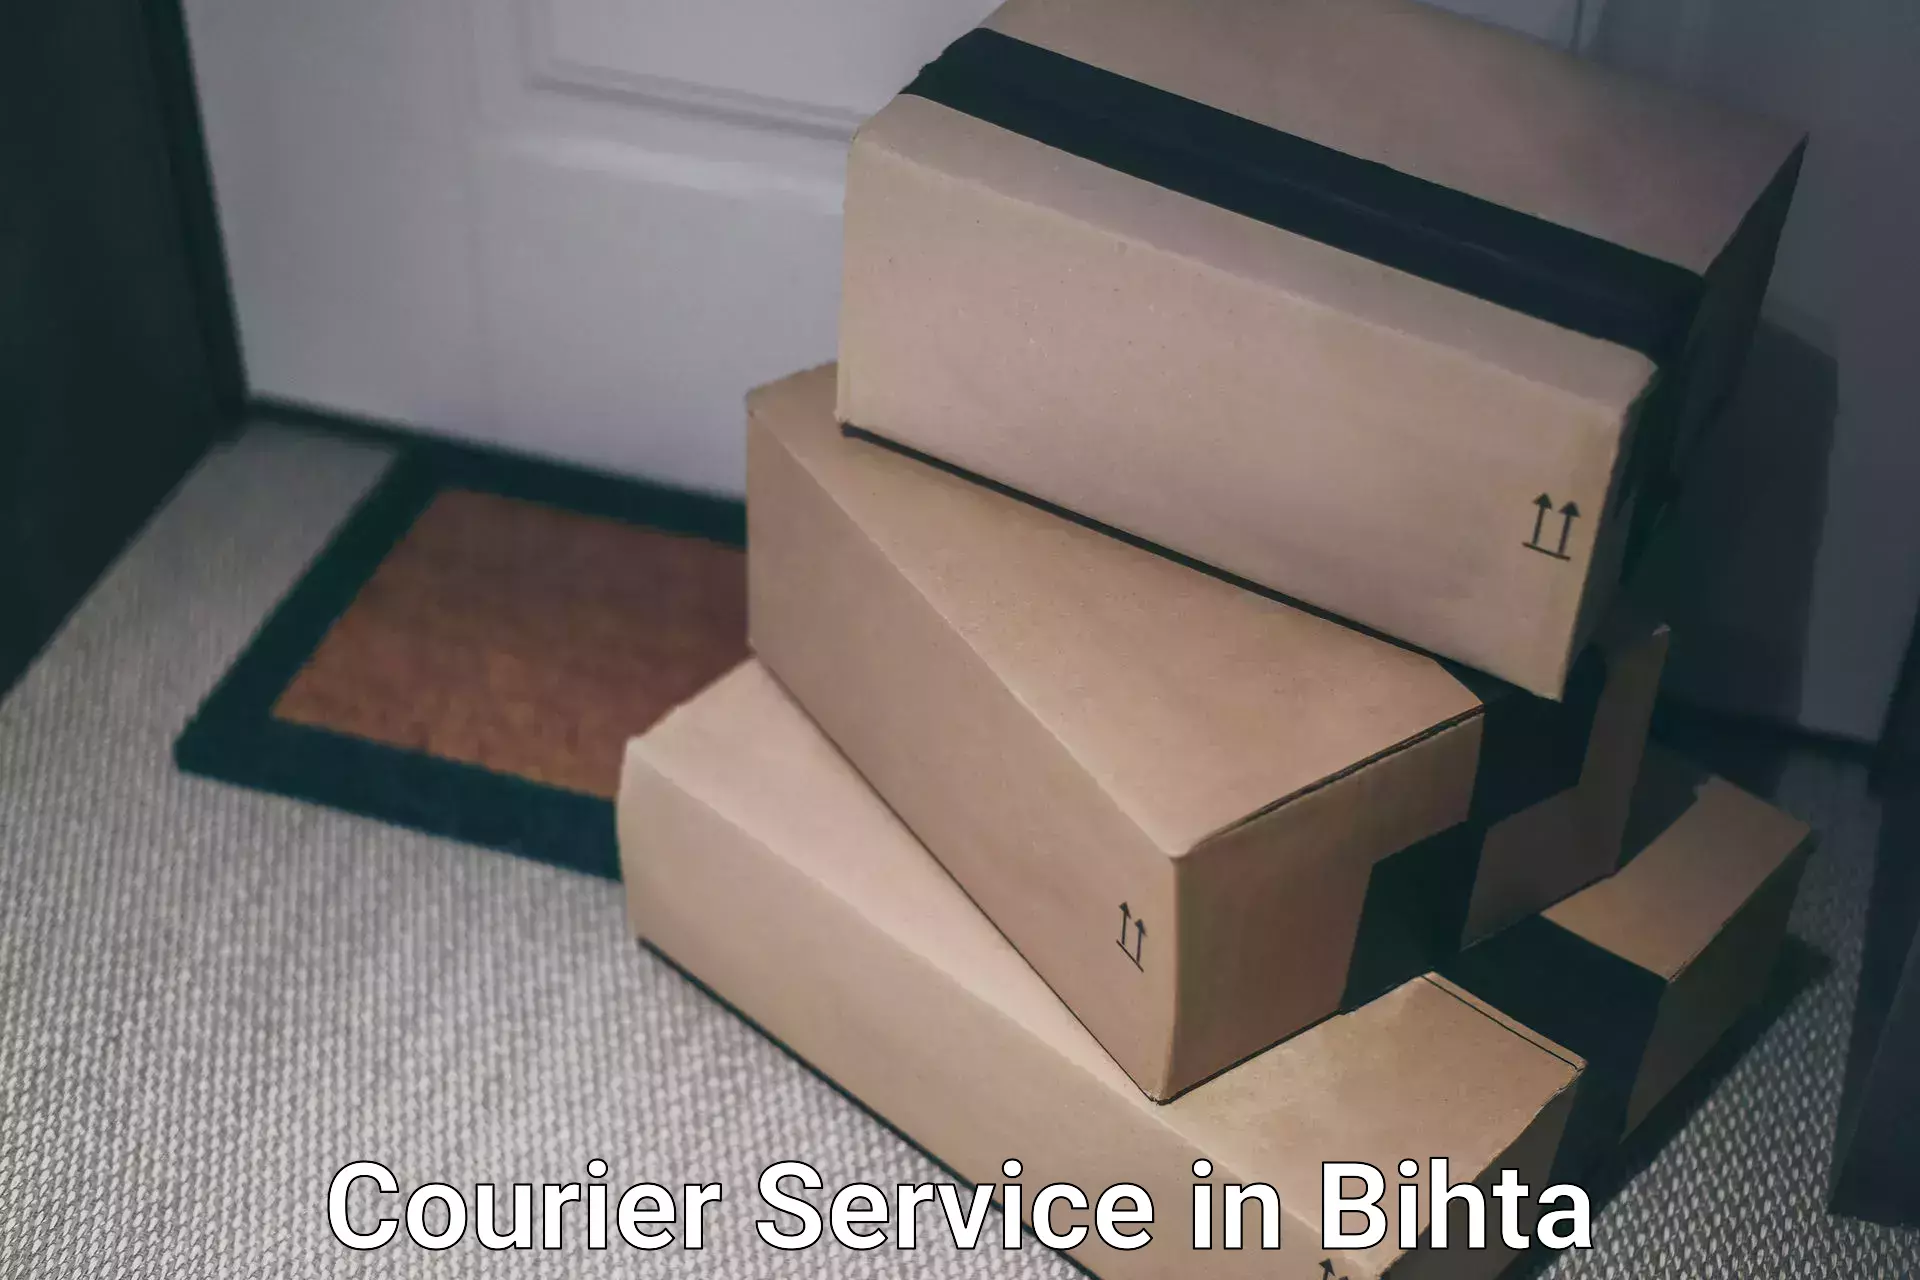 Reliable shipping solutions in Bihta